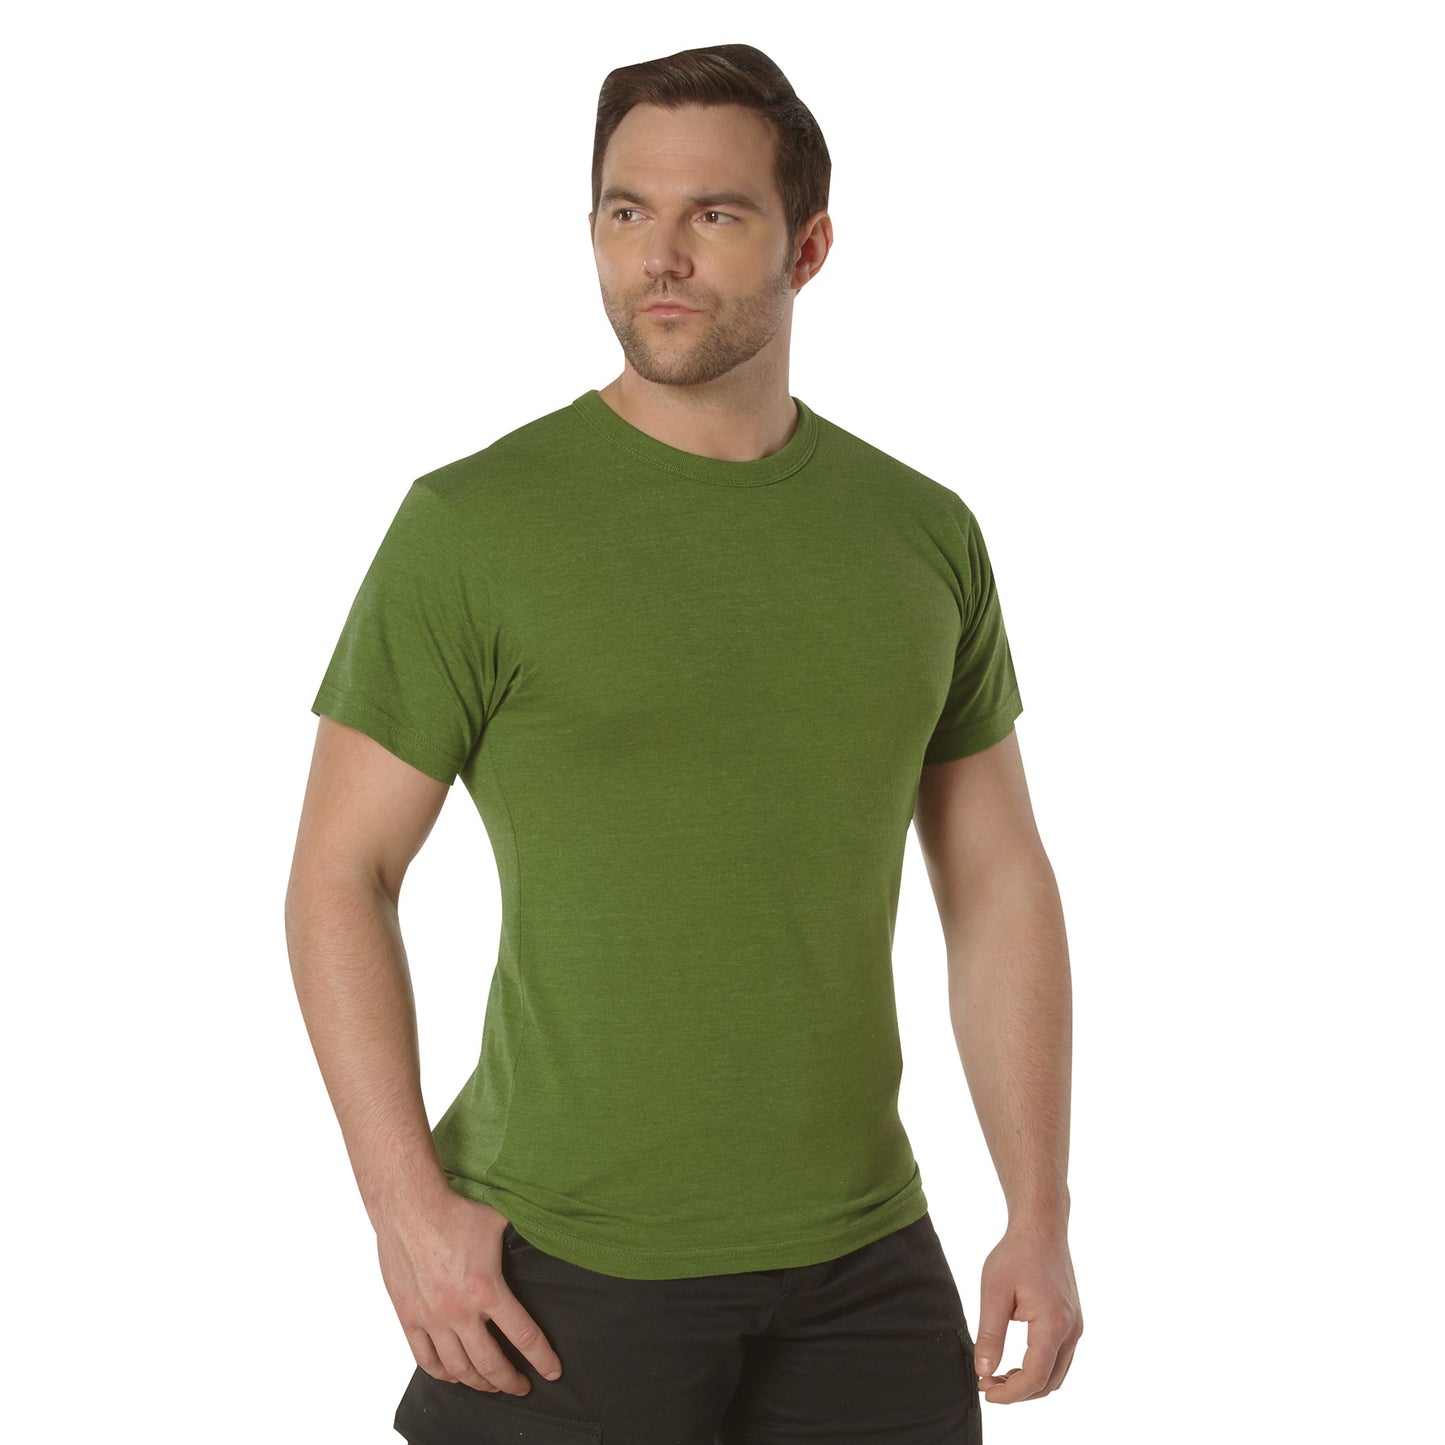 Solid Color T-Shirt with Cotton / Polyester Blend